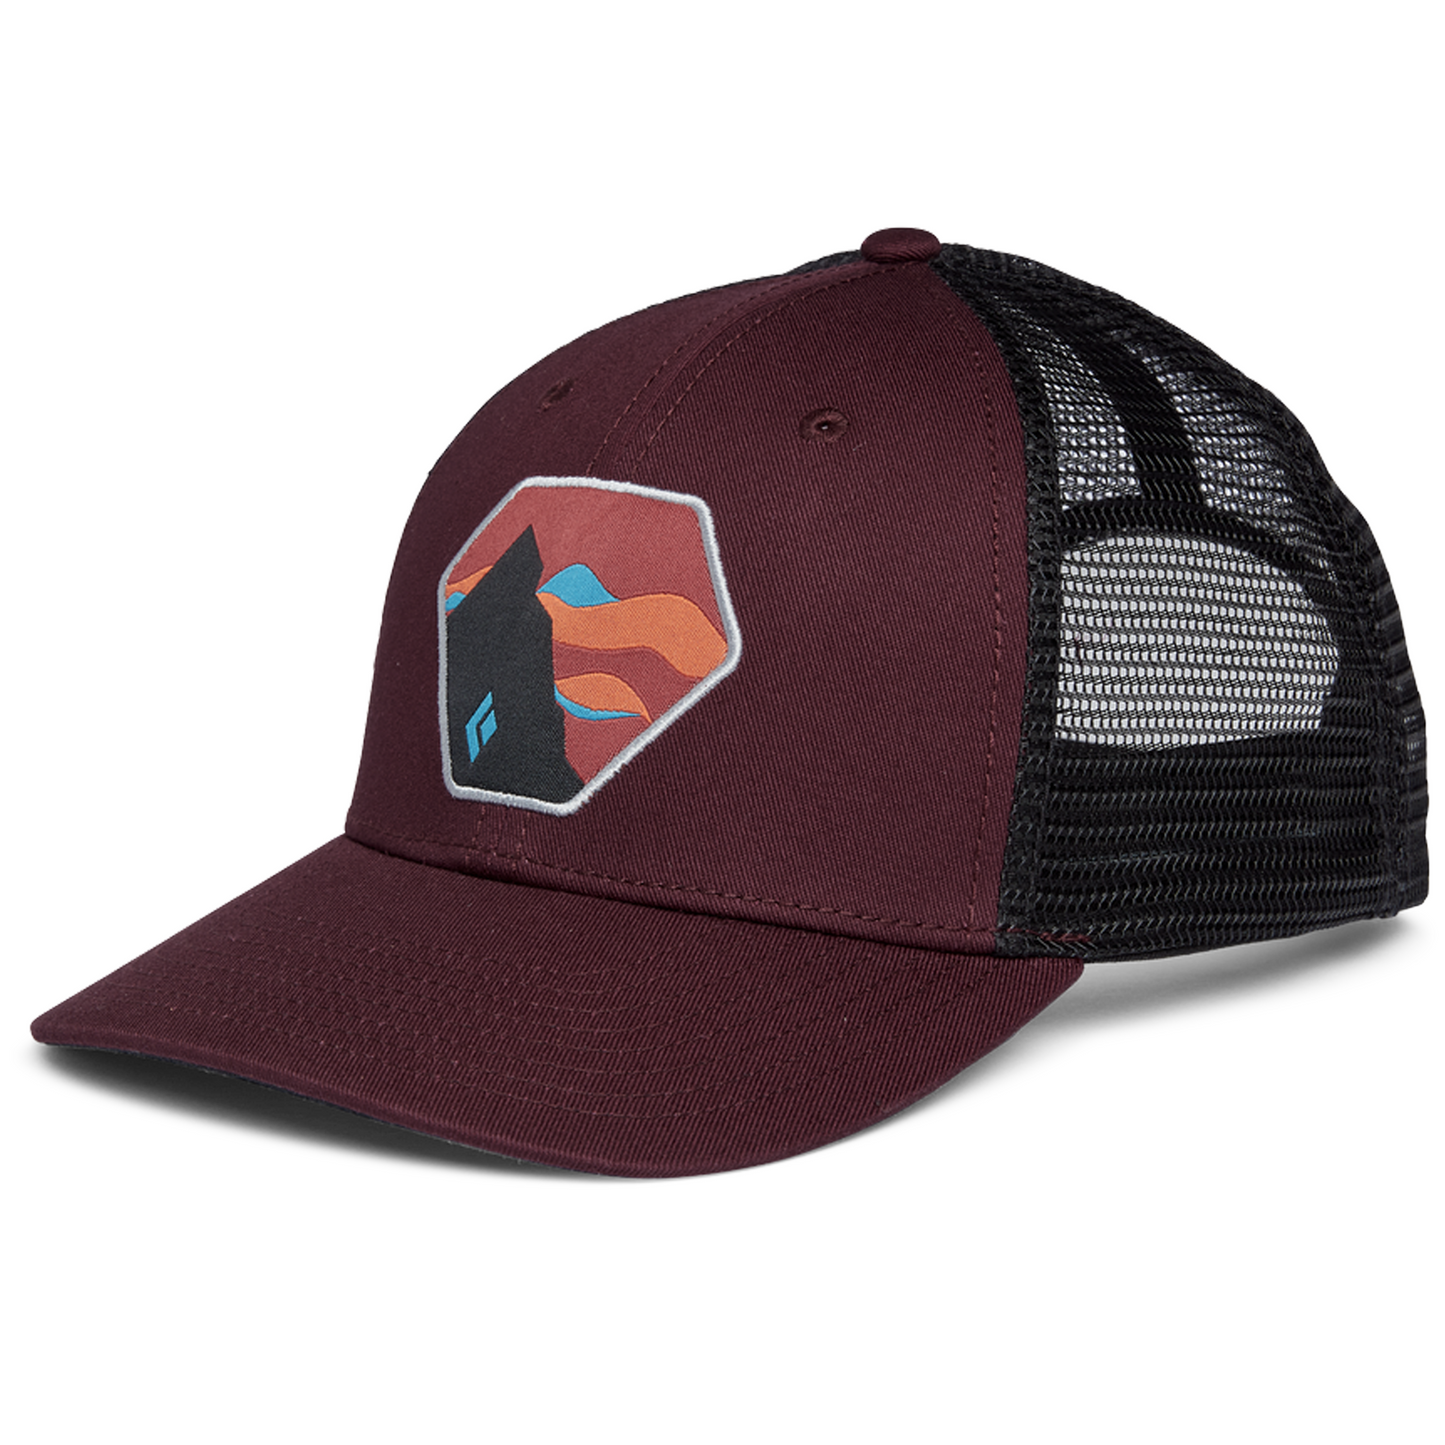 Low Profile Trucker Hat Big Adventure Outfitters